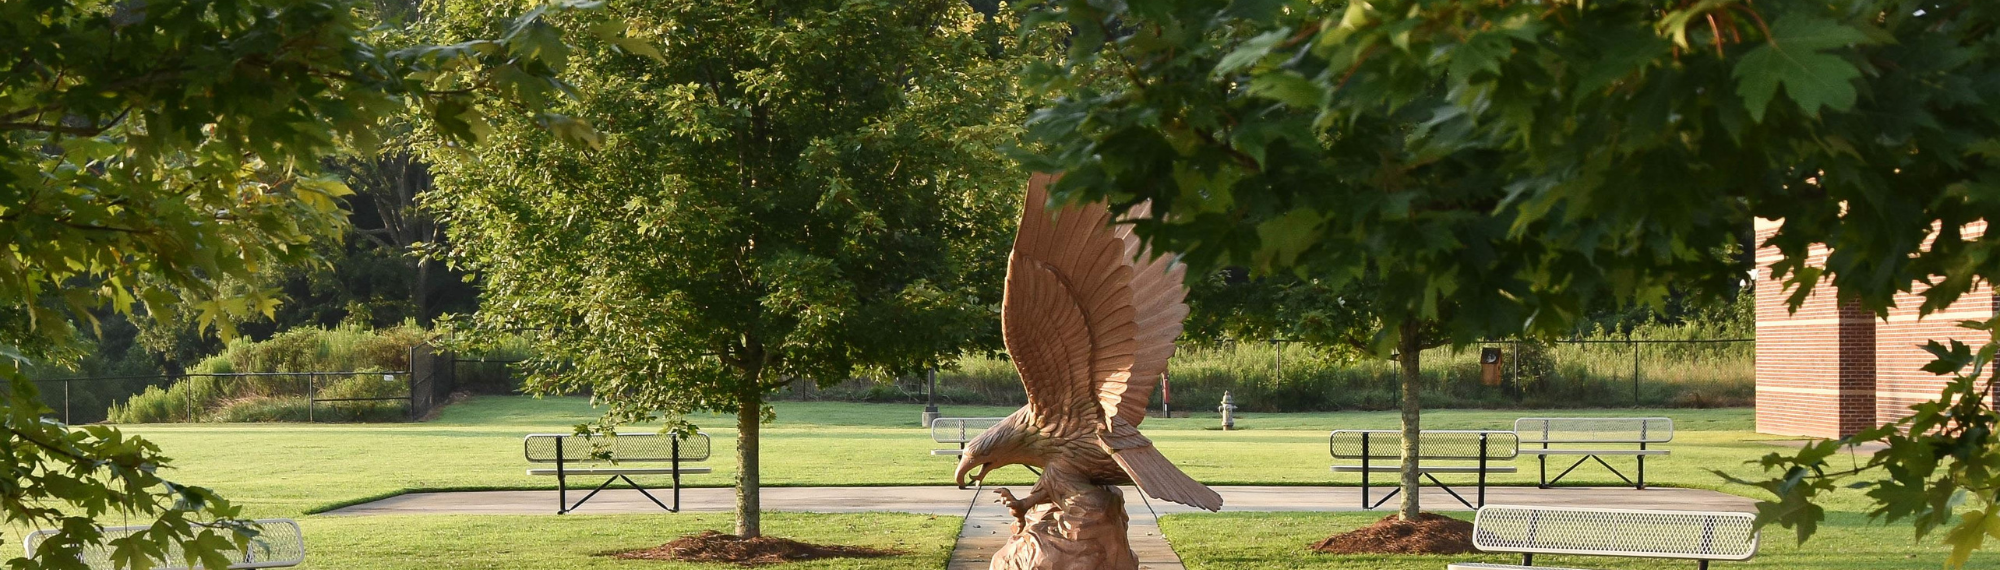 Picture of eagle in courtyard